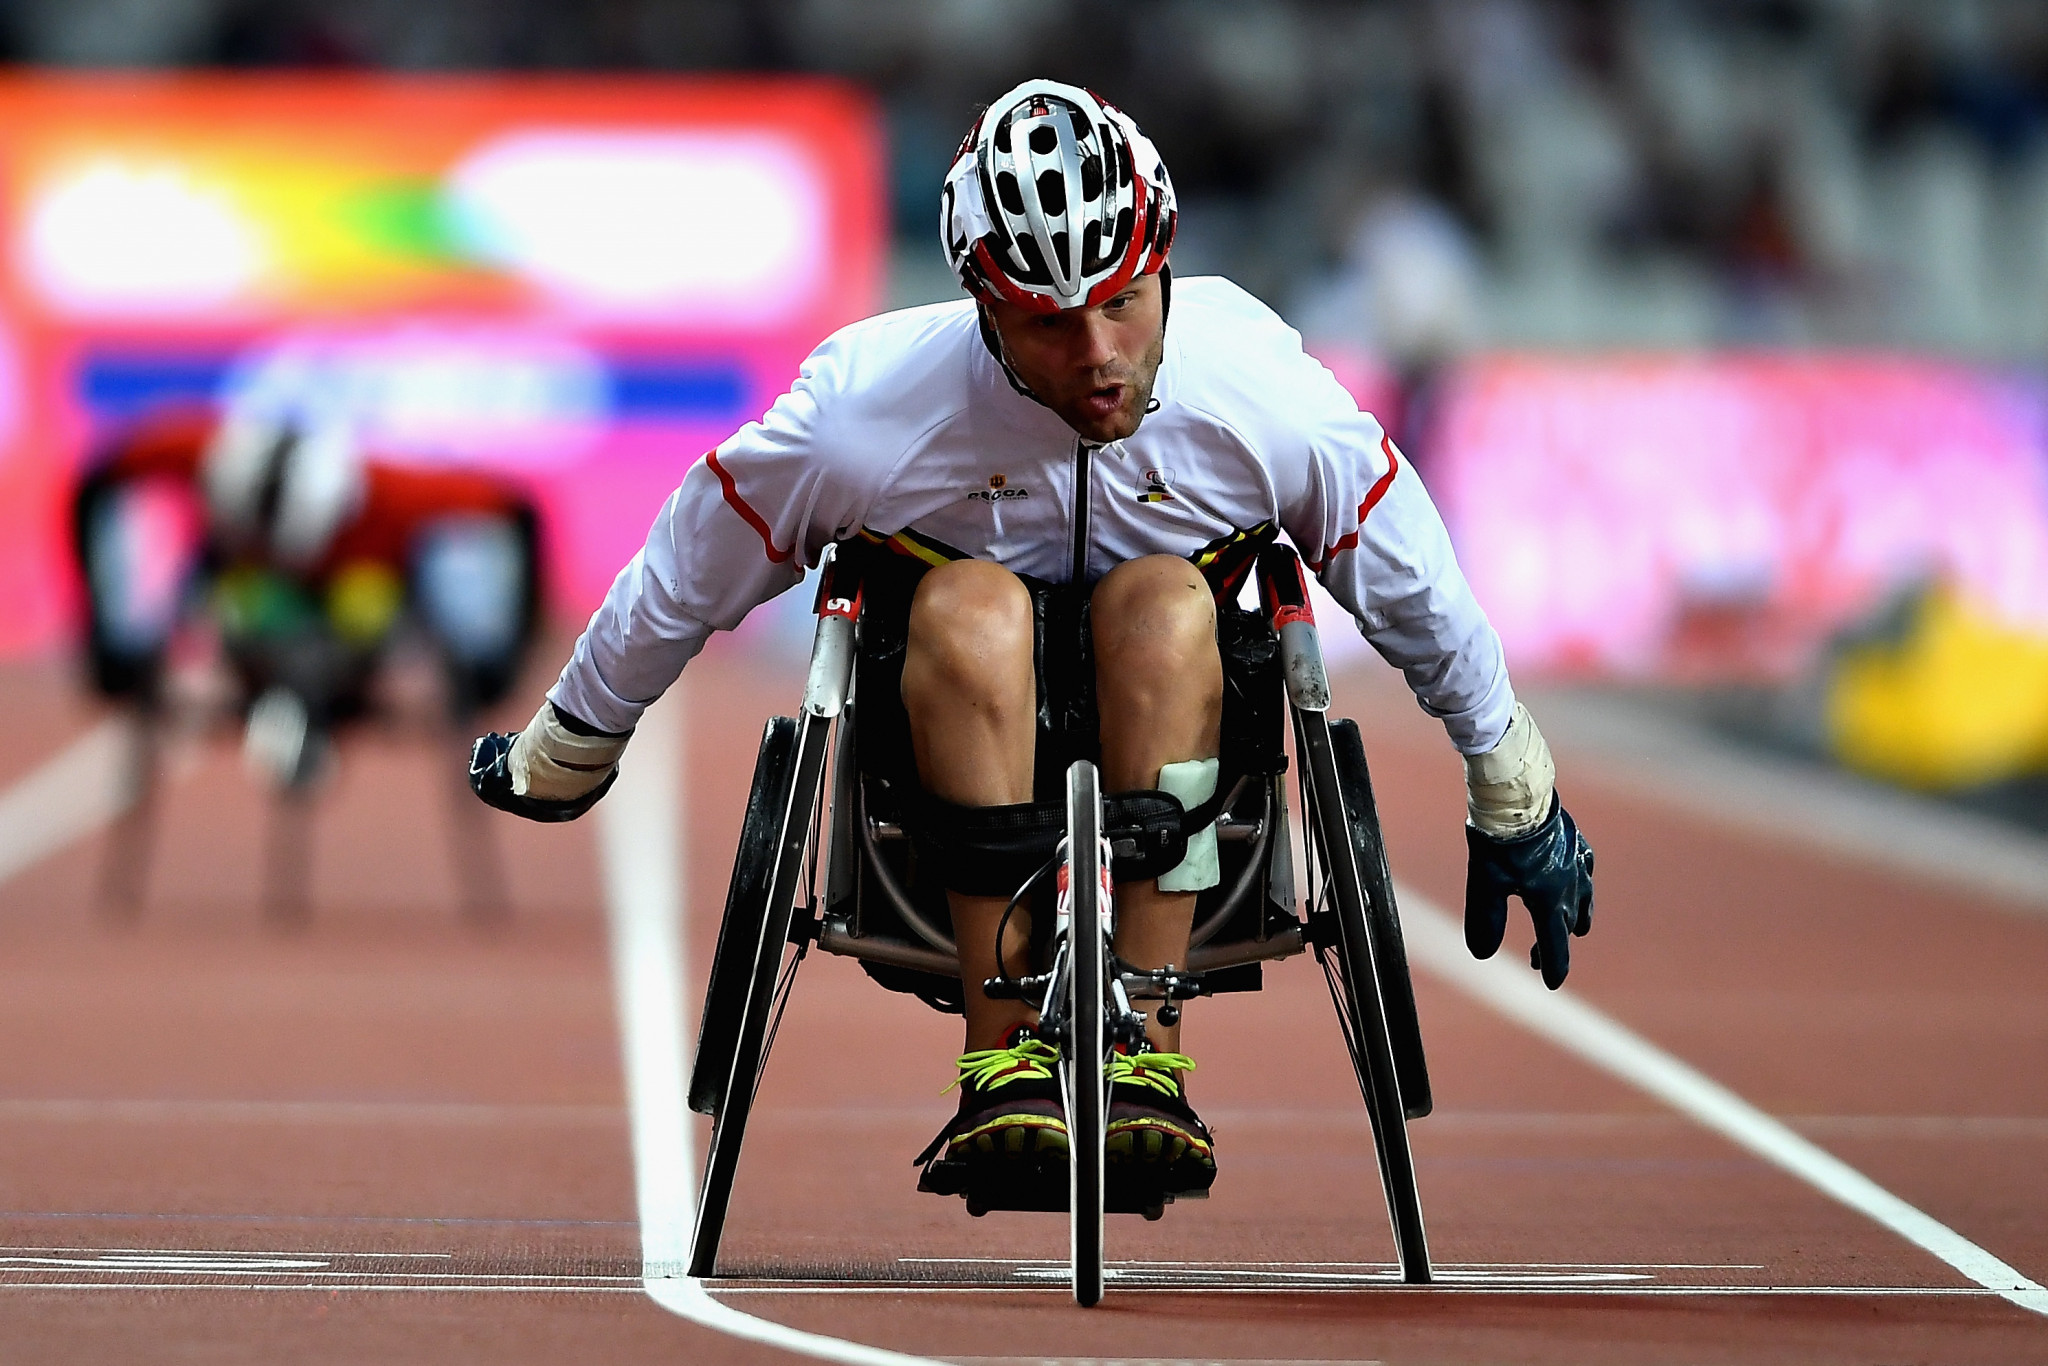 Quintet in the frame for IPC Athlete of the Month for May award